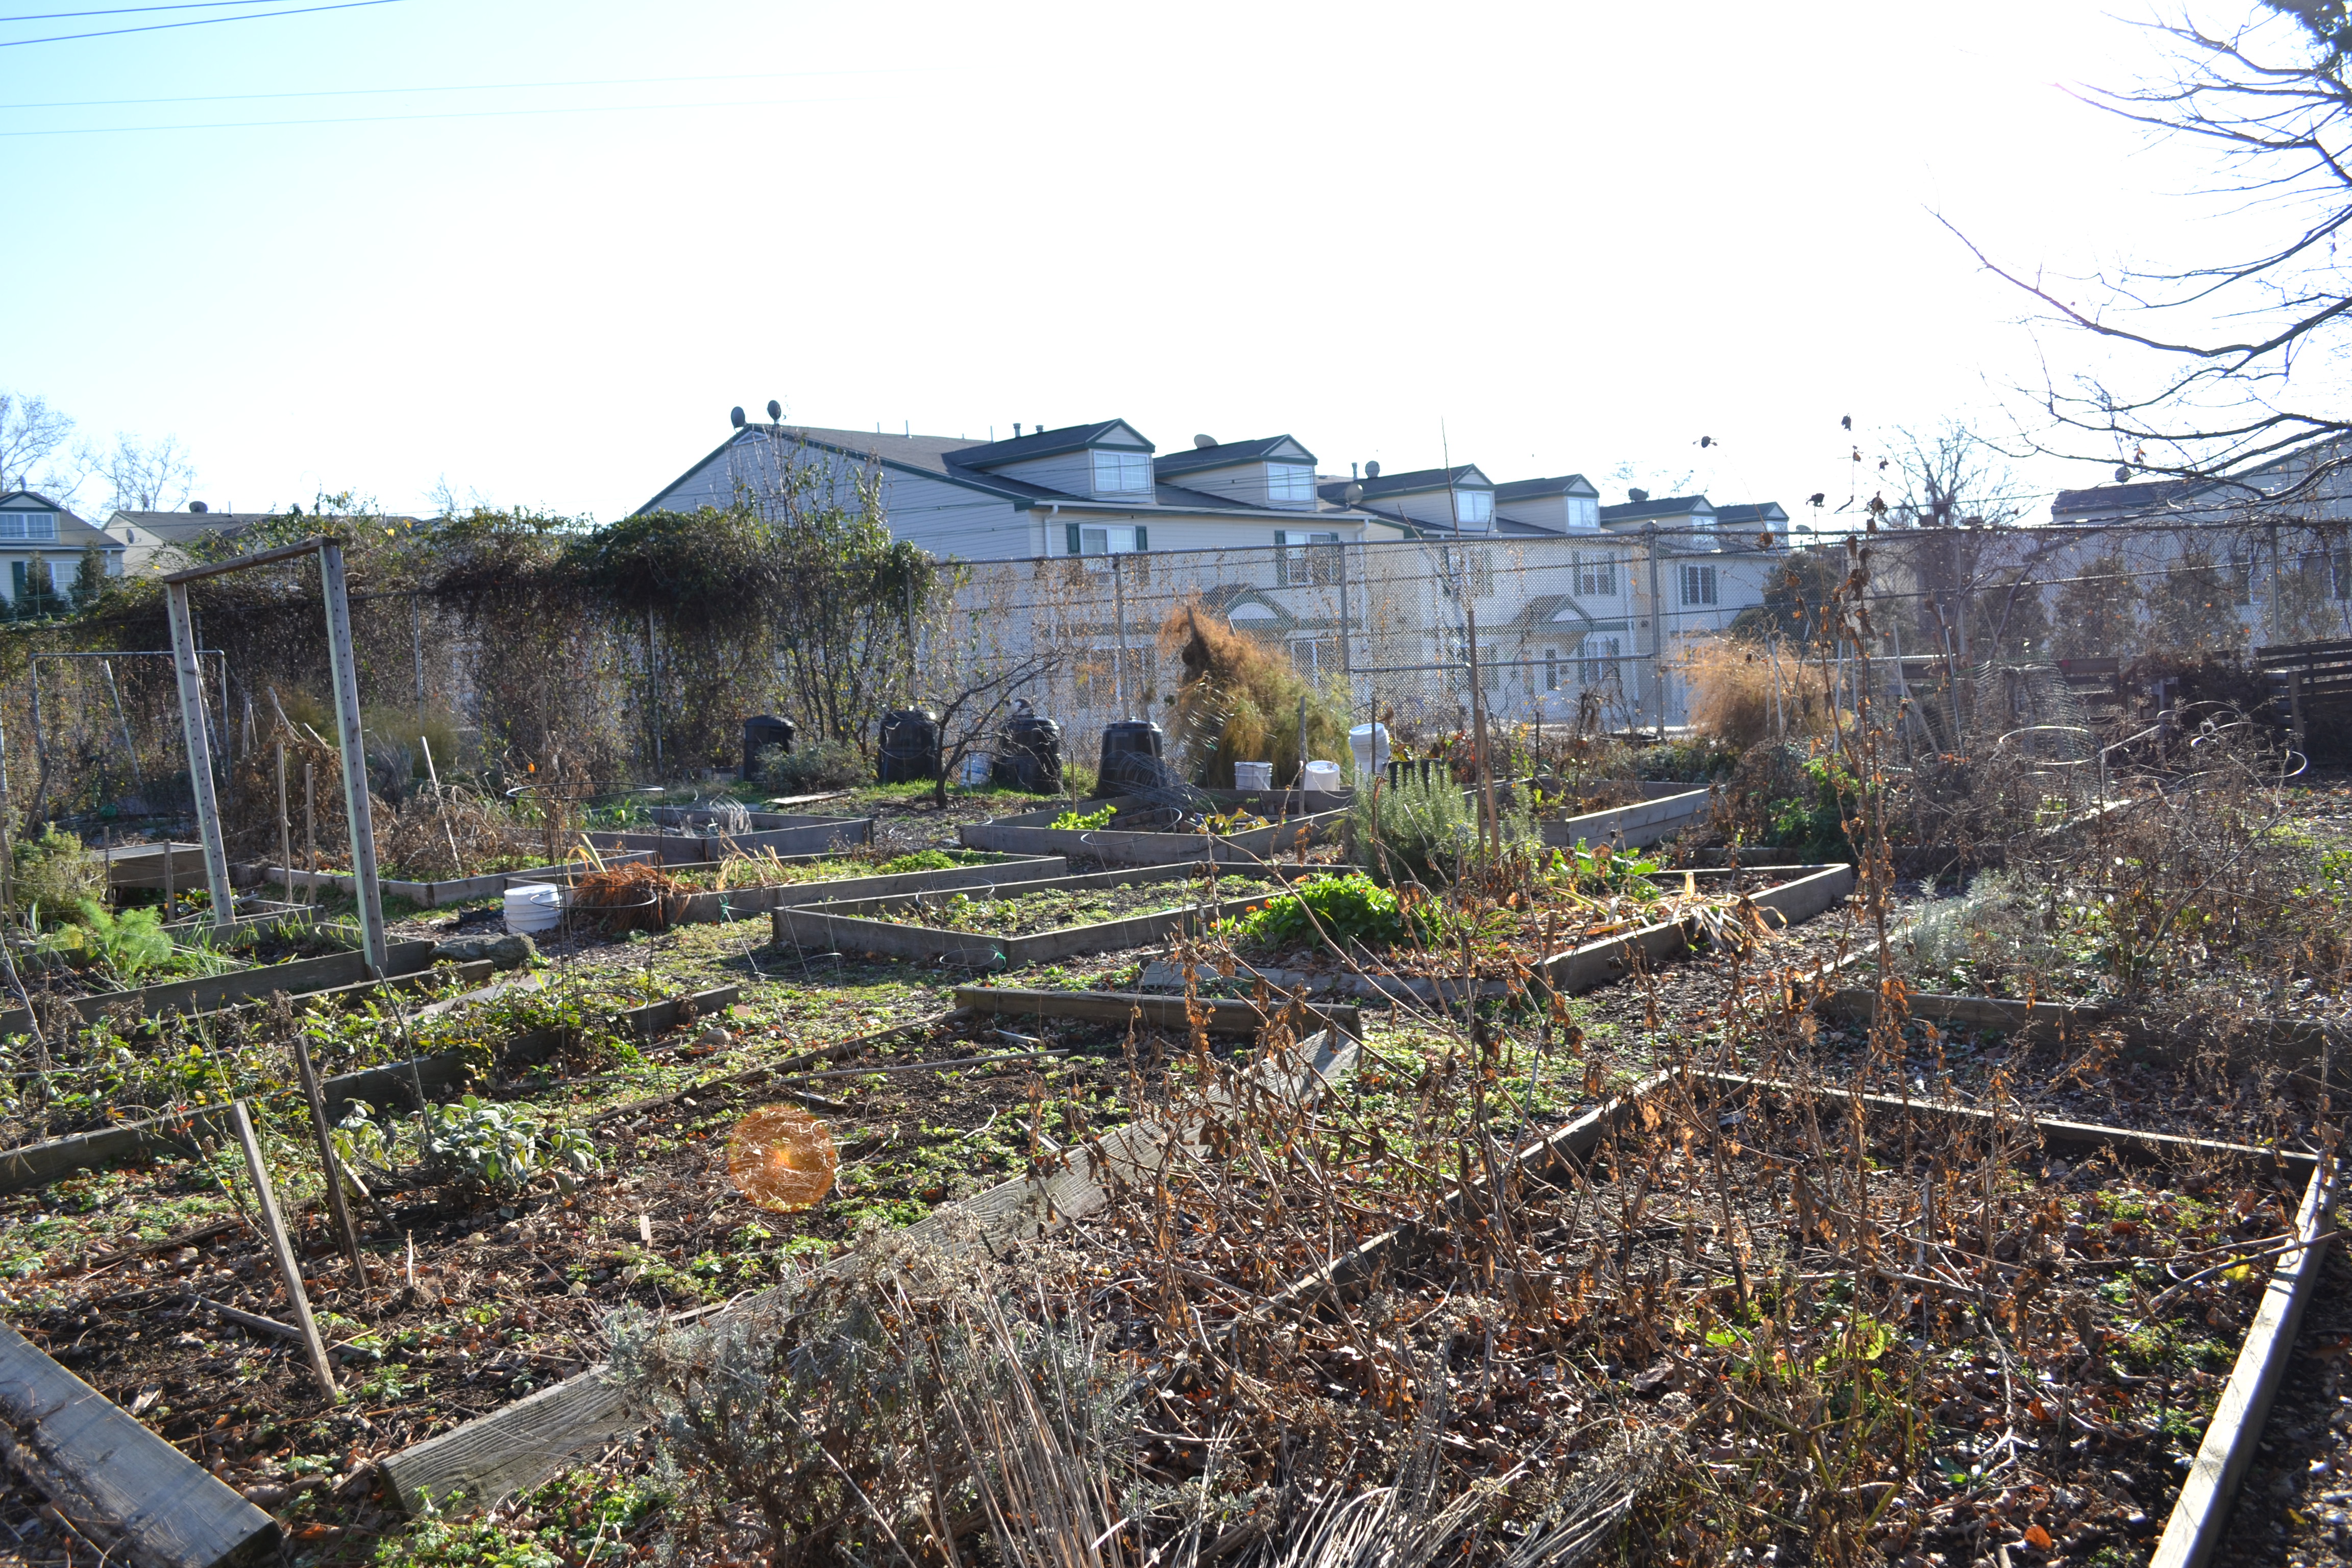 Even in its dormant, winter state, the St. Bernard plot is a crowded community garden.